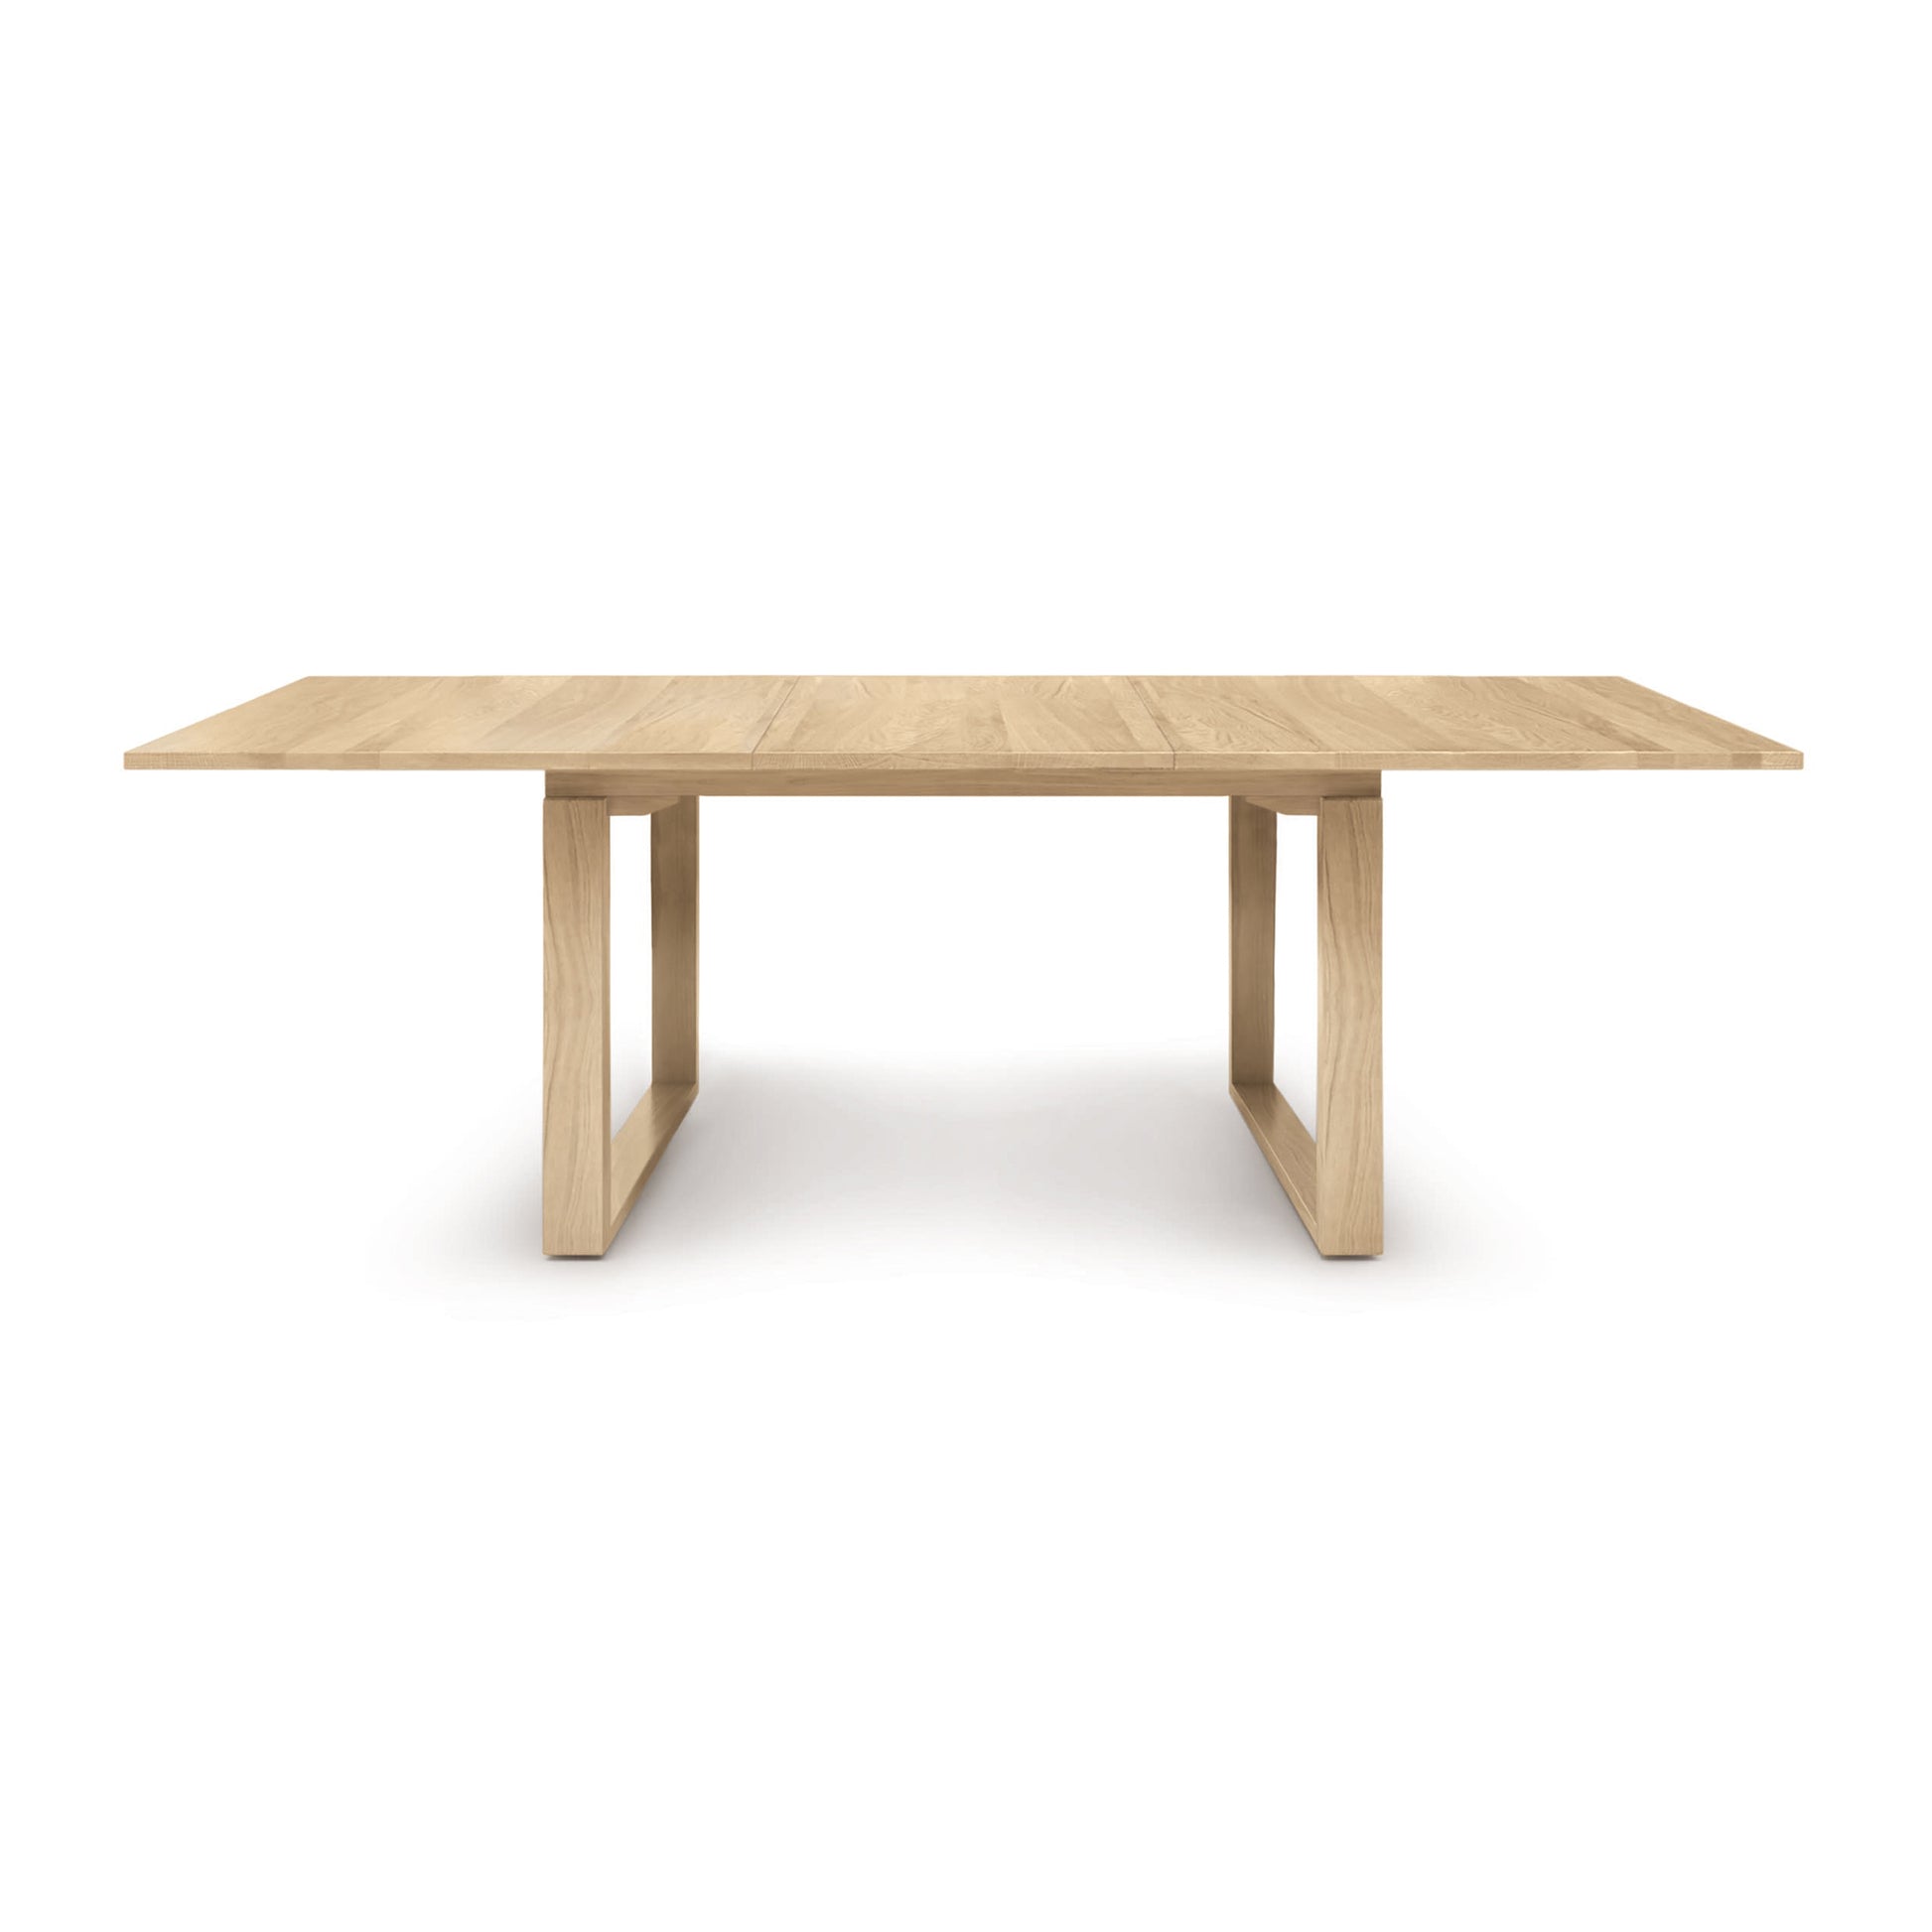 An Iso Extension Dining Table with a solid oak wood base by Copeland Furniture.